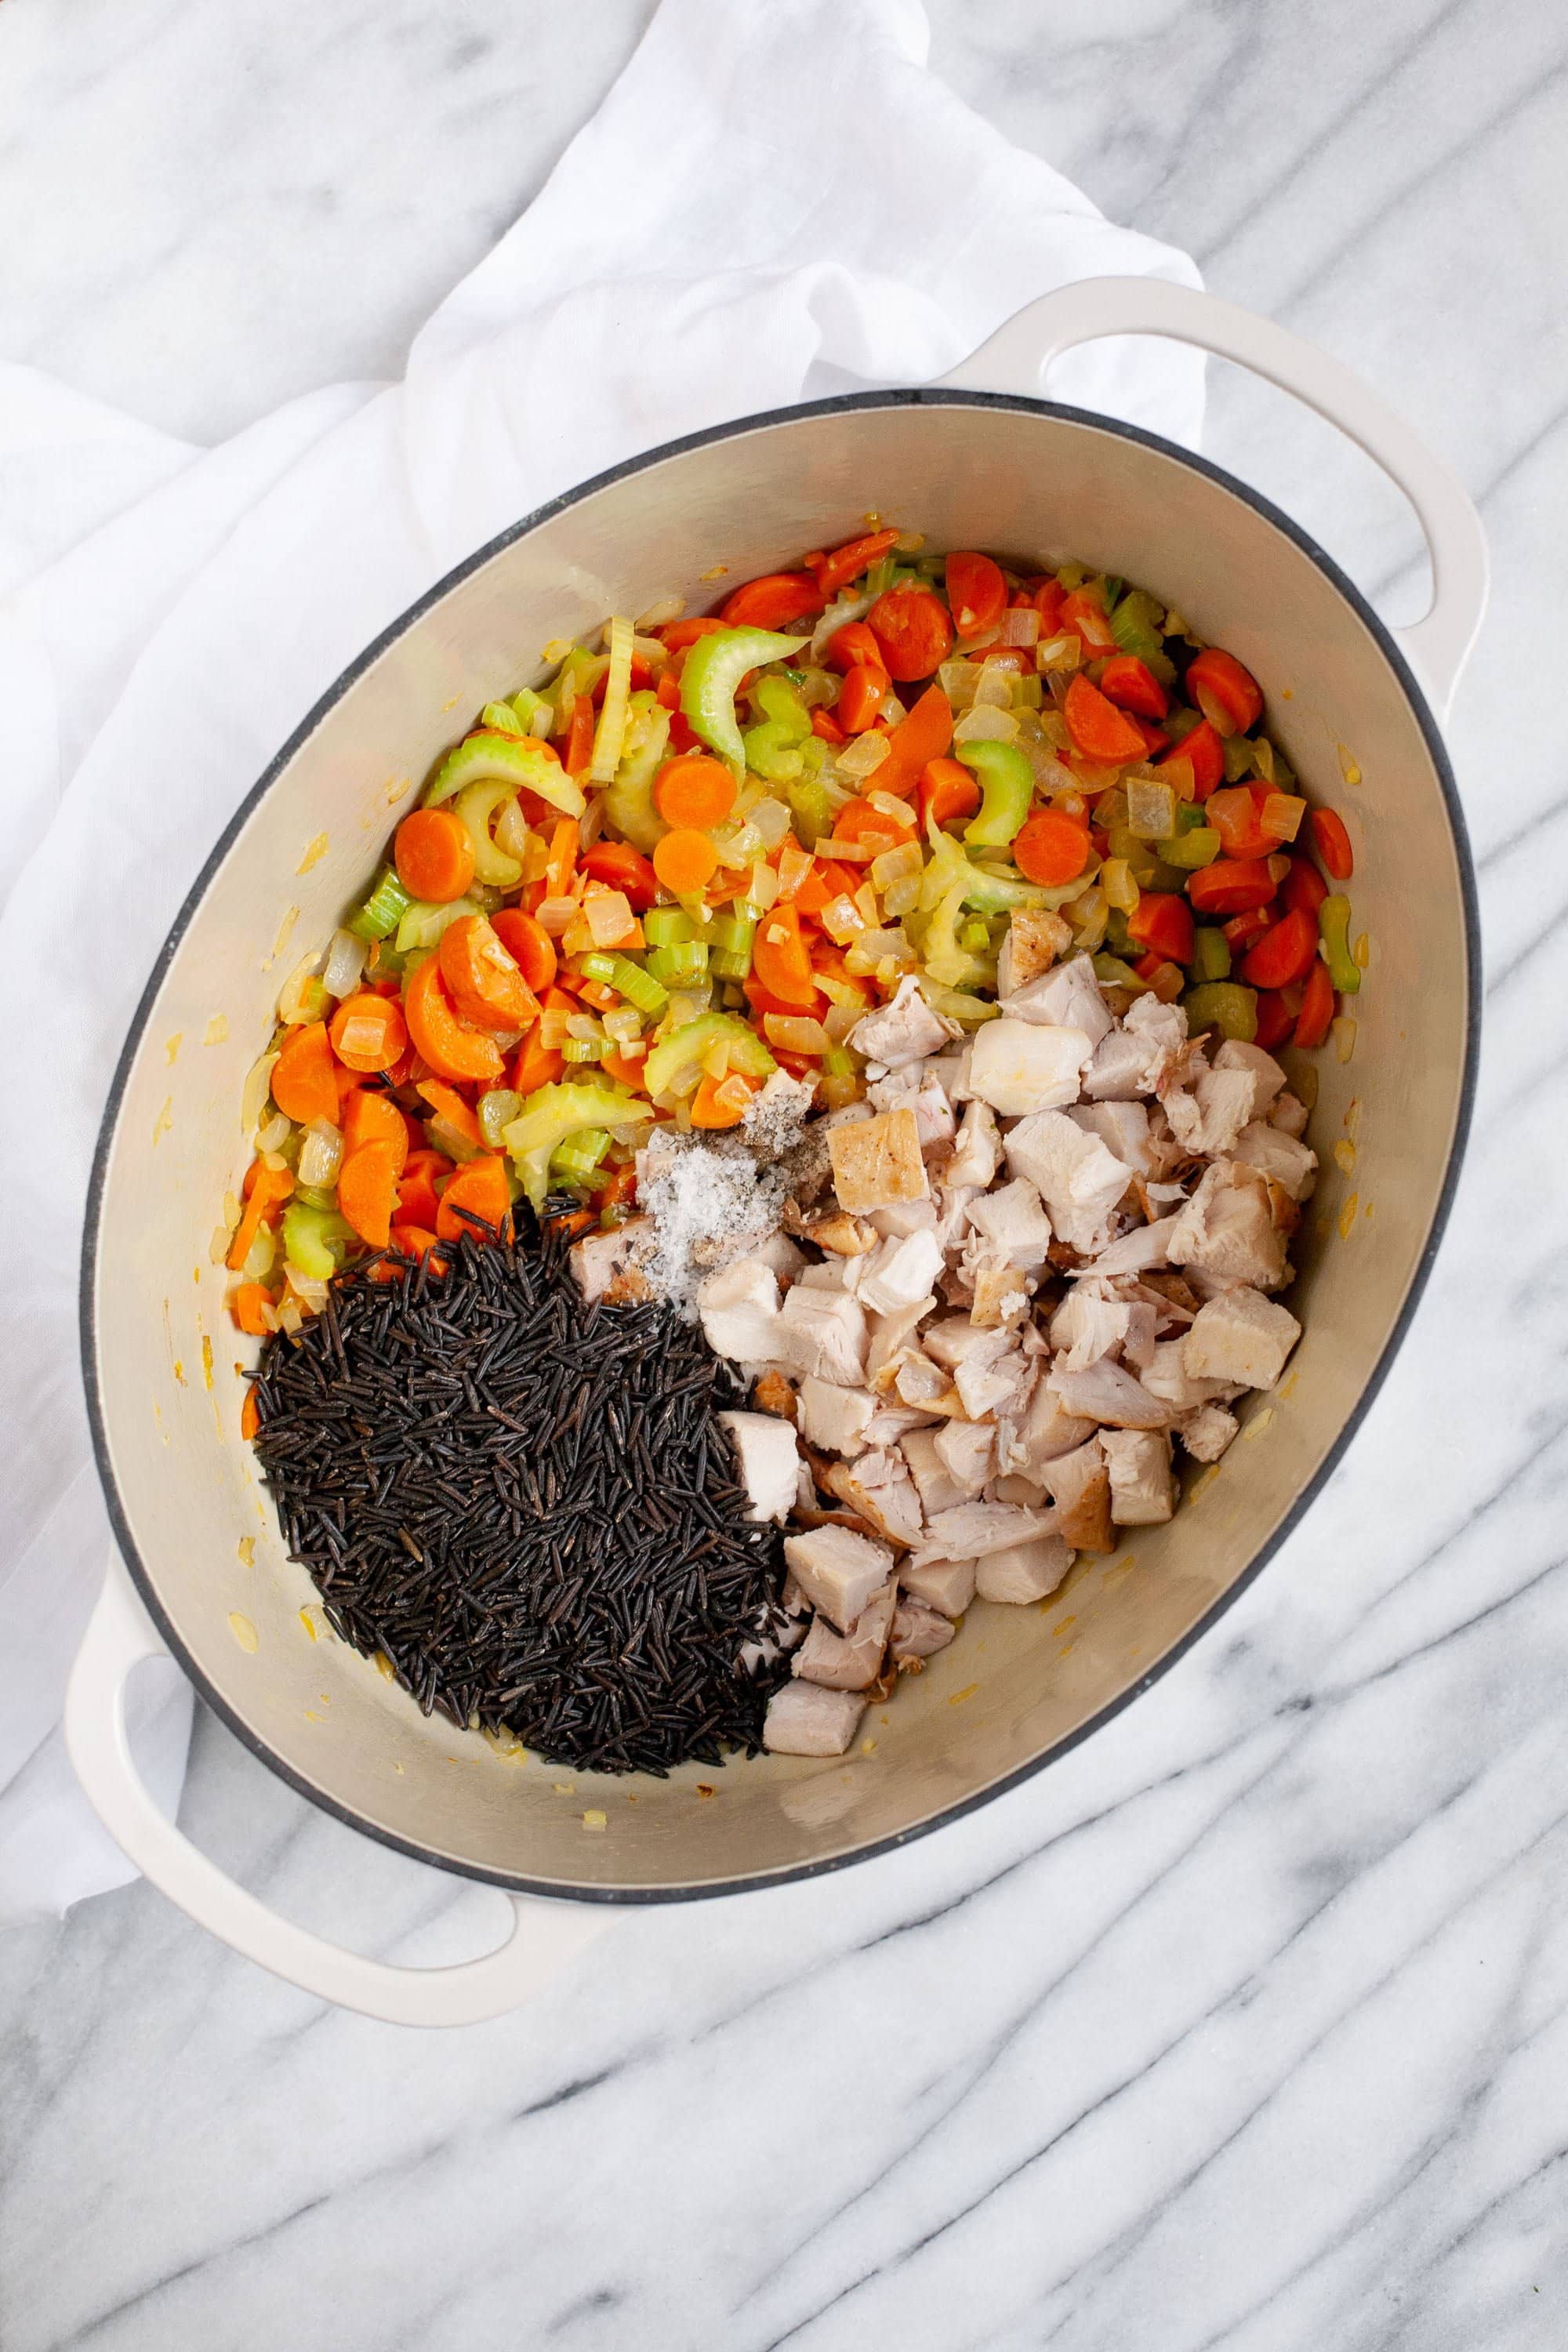 Ingredients in a Dutch oven, including wild rice, chopped vegetables, and chopped poultry